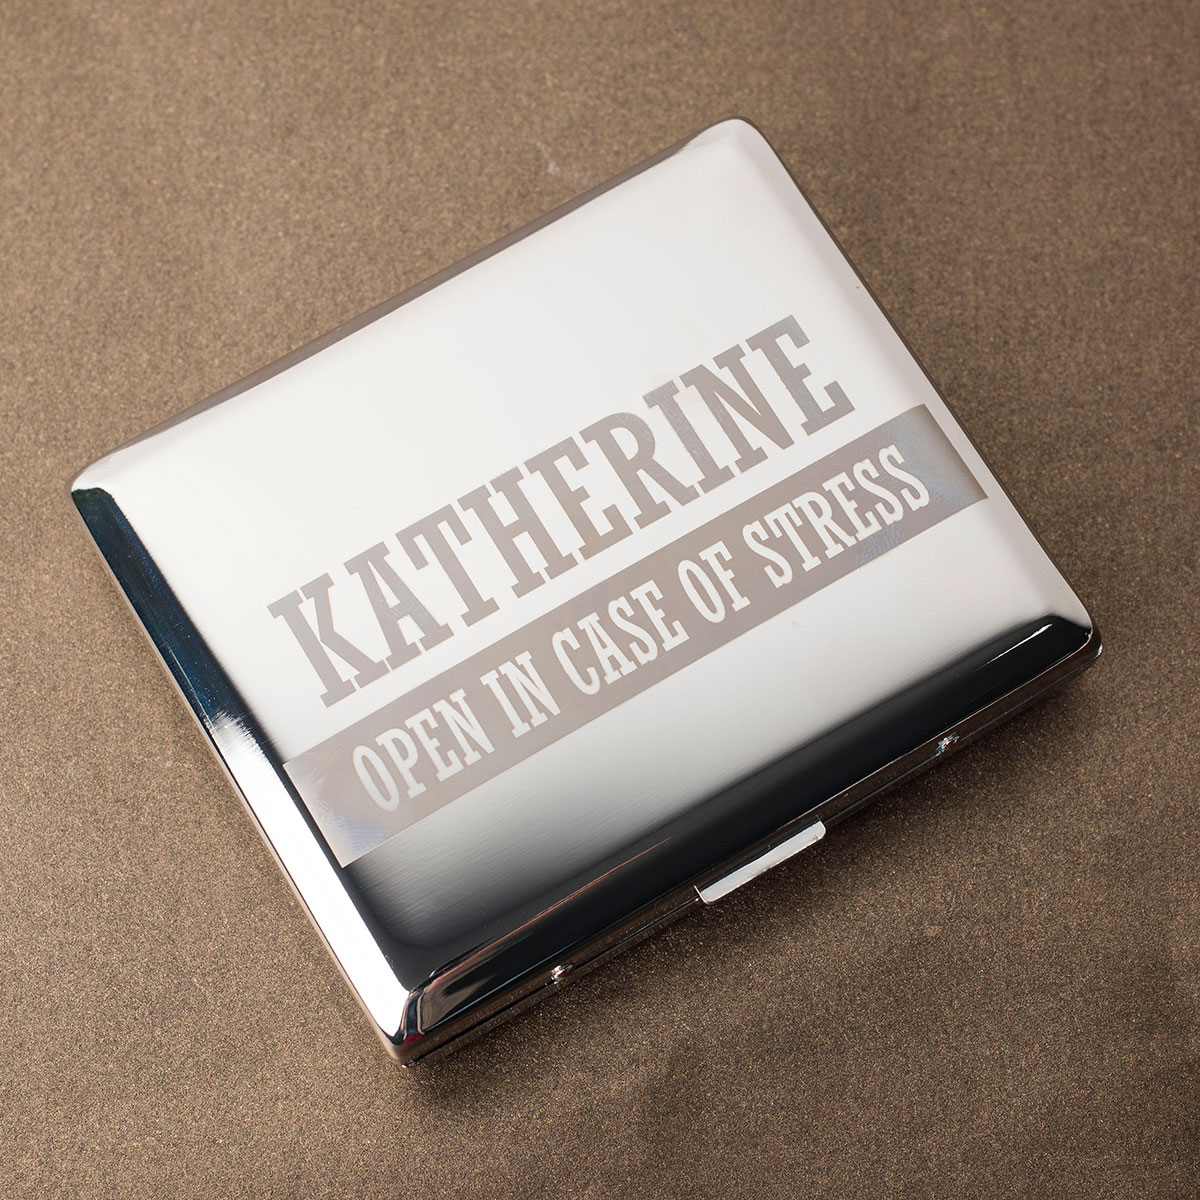 Engraved Cigarette Case - Open In Case Of Stress